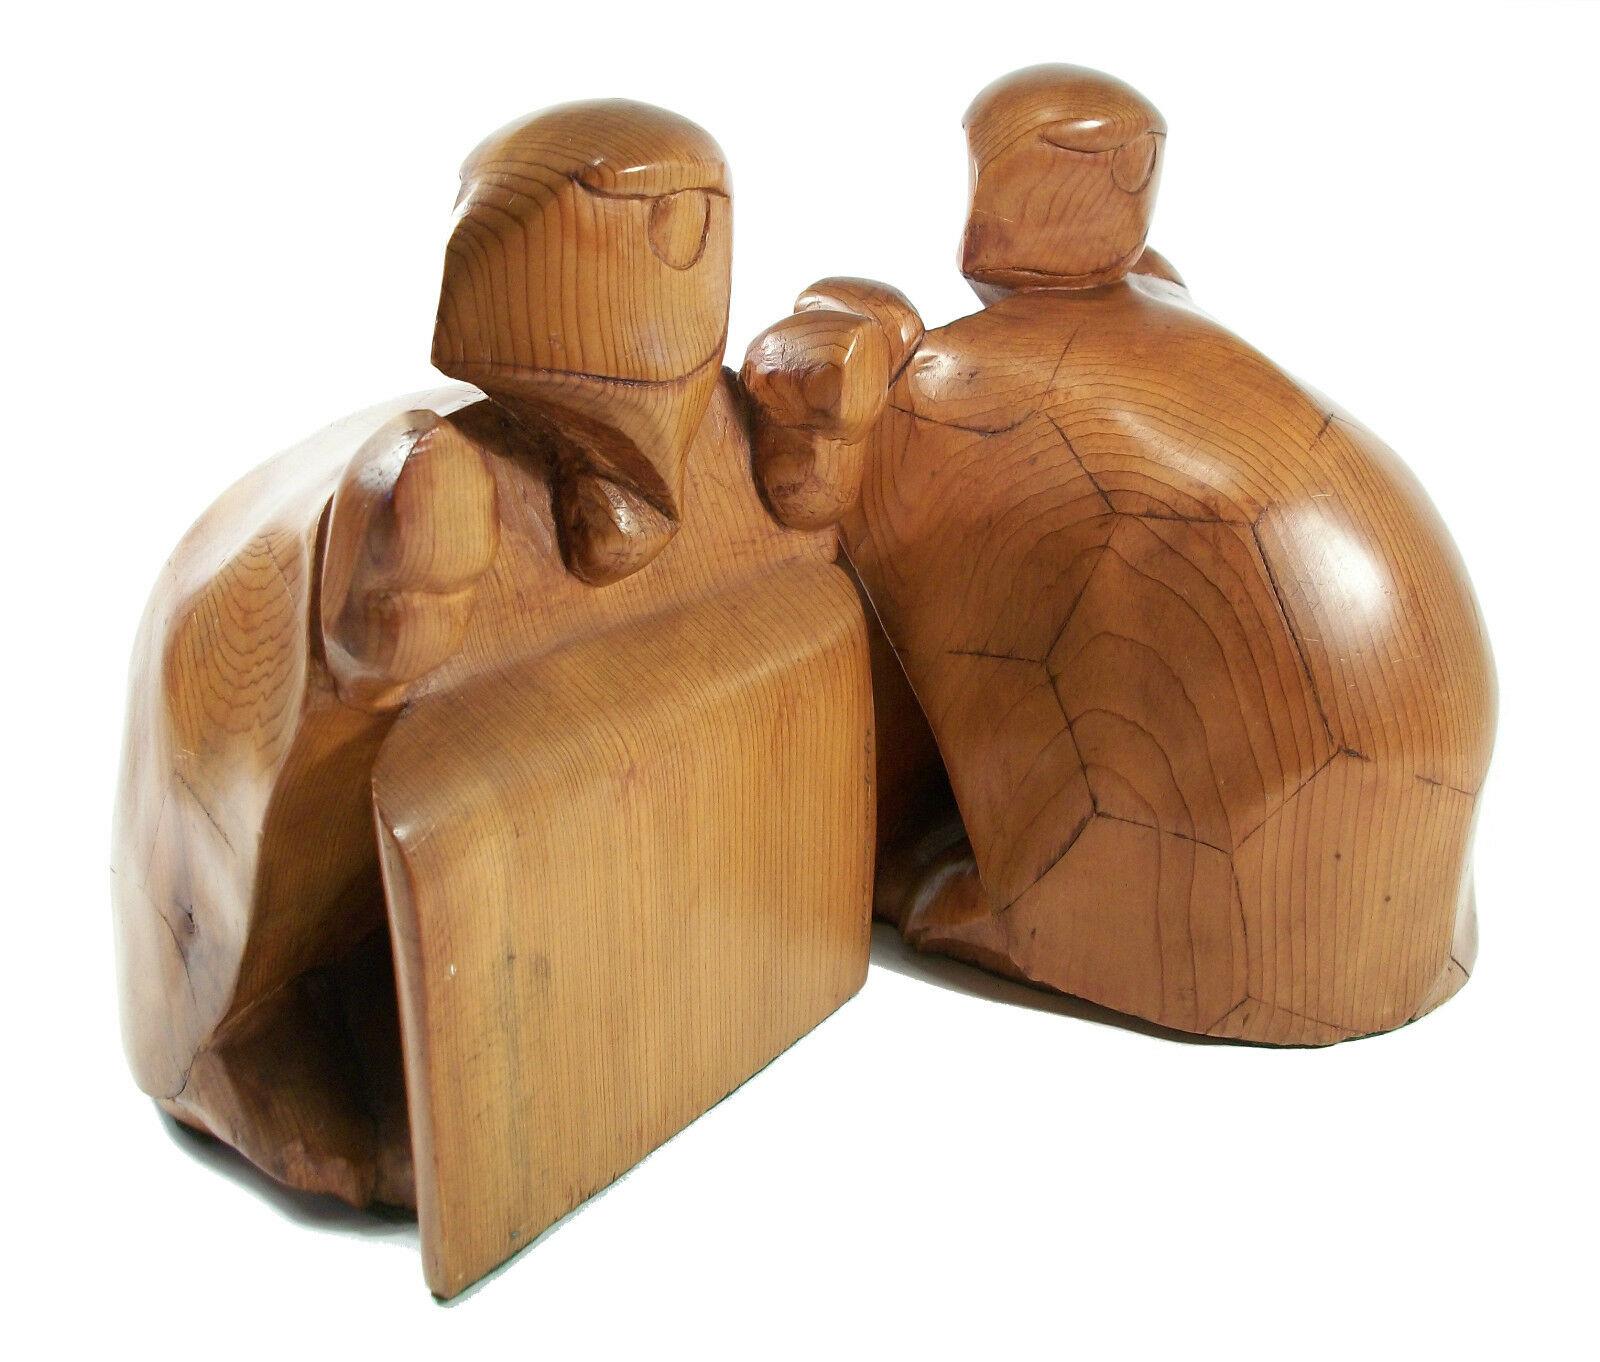 ALFRED JAMES PERRY - mid-century - folk art - turtle form bookends - articulated shell and features - each hand carved from a solid block of pine - weighted - original finish - each signed and dated - likely Canadian - circa 1950.

Excellent